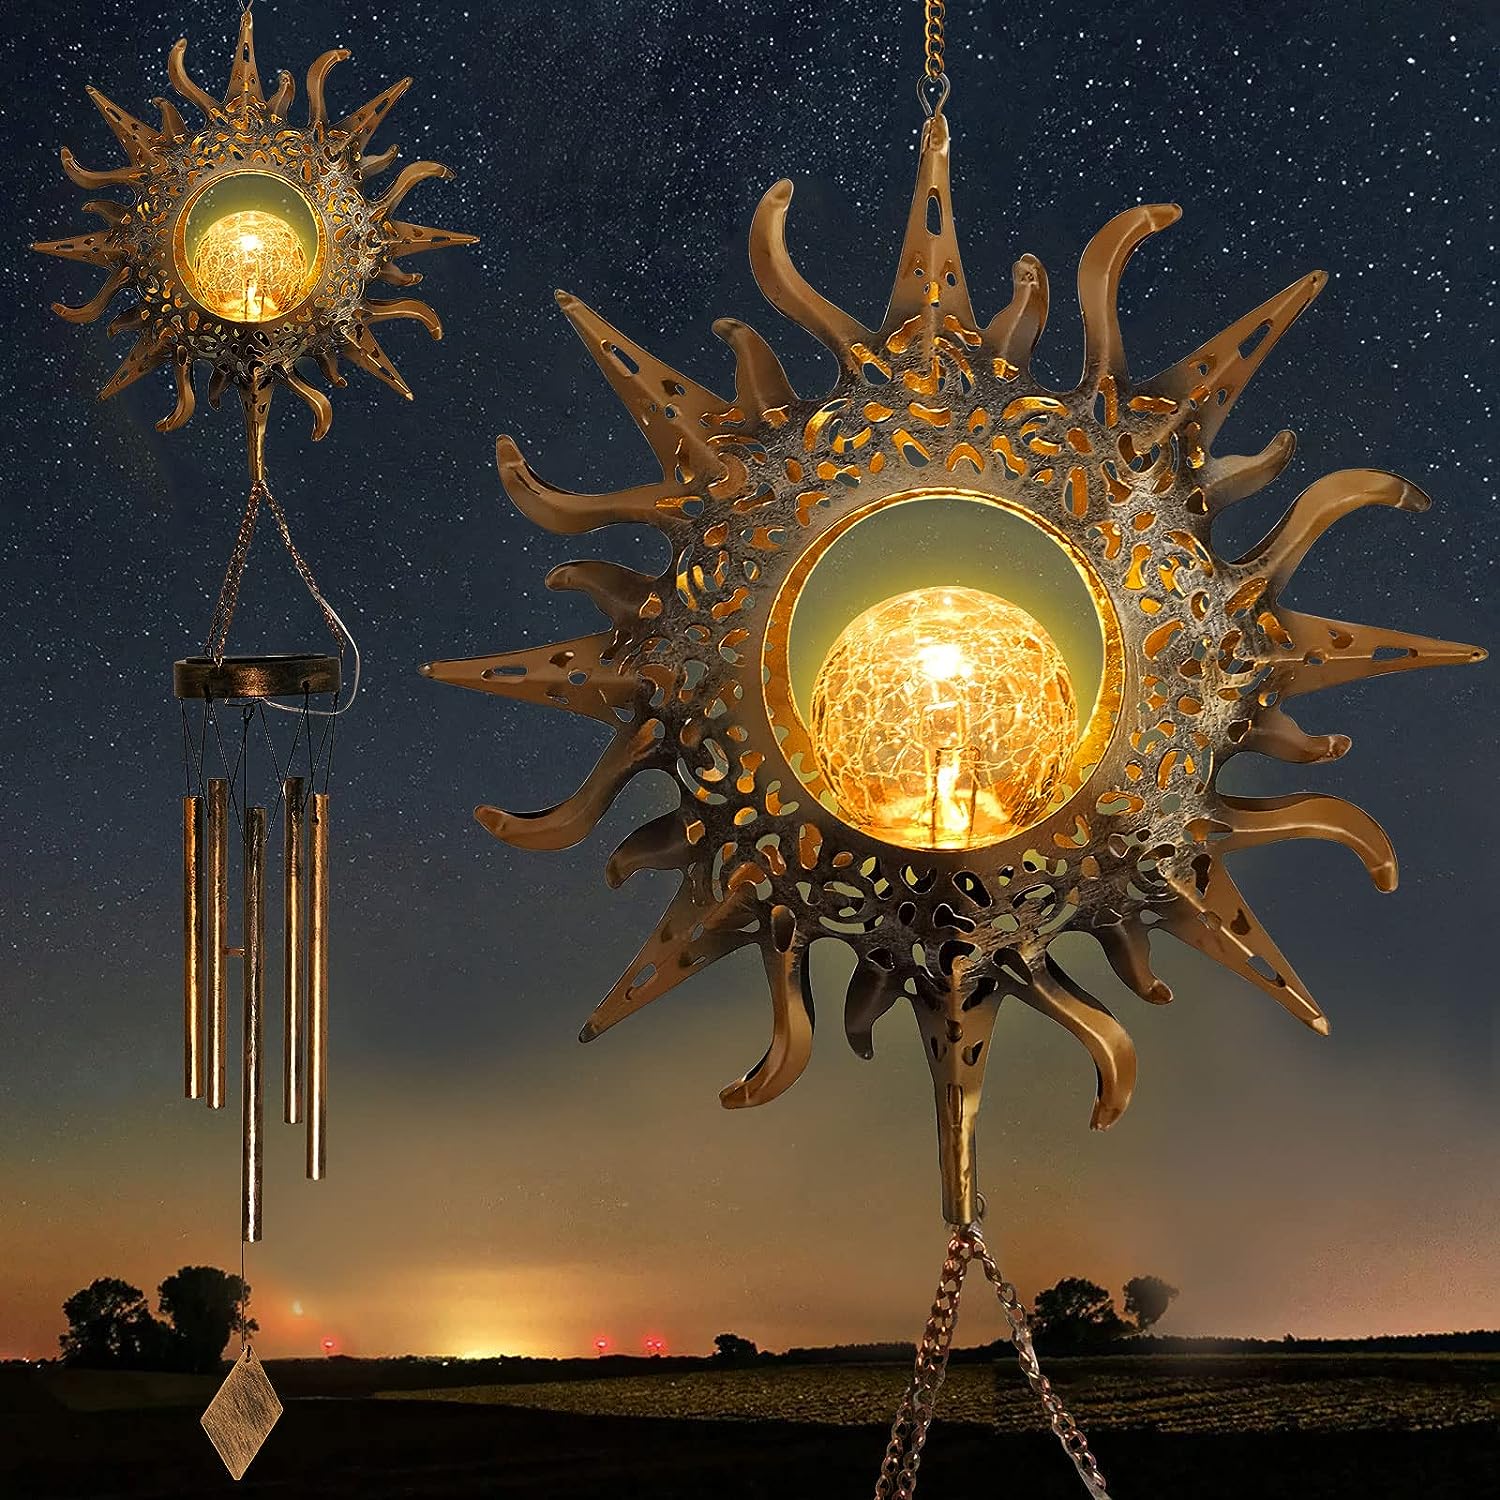 two sun shaped wind chimes with lamps and background of night sky with stars